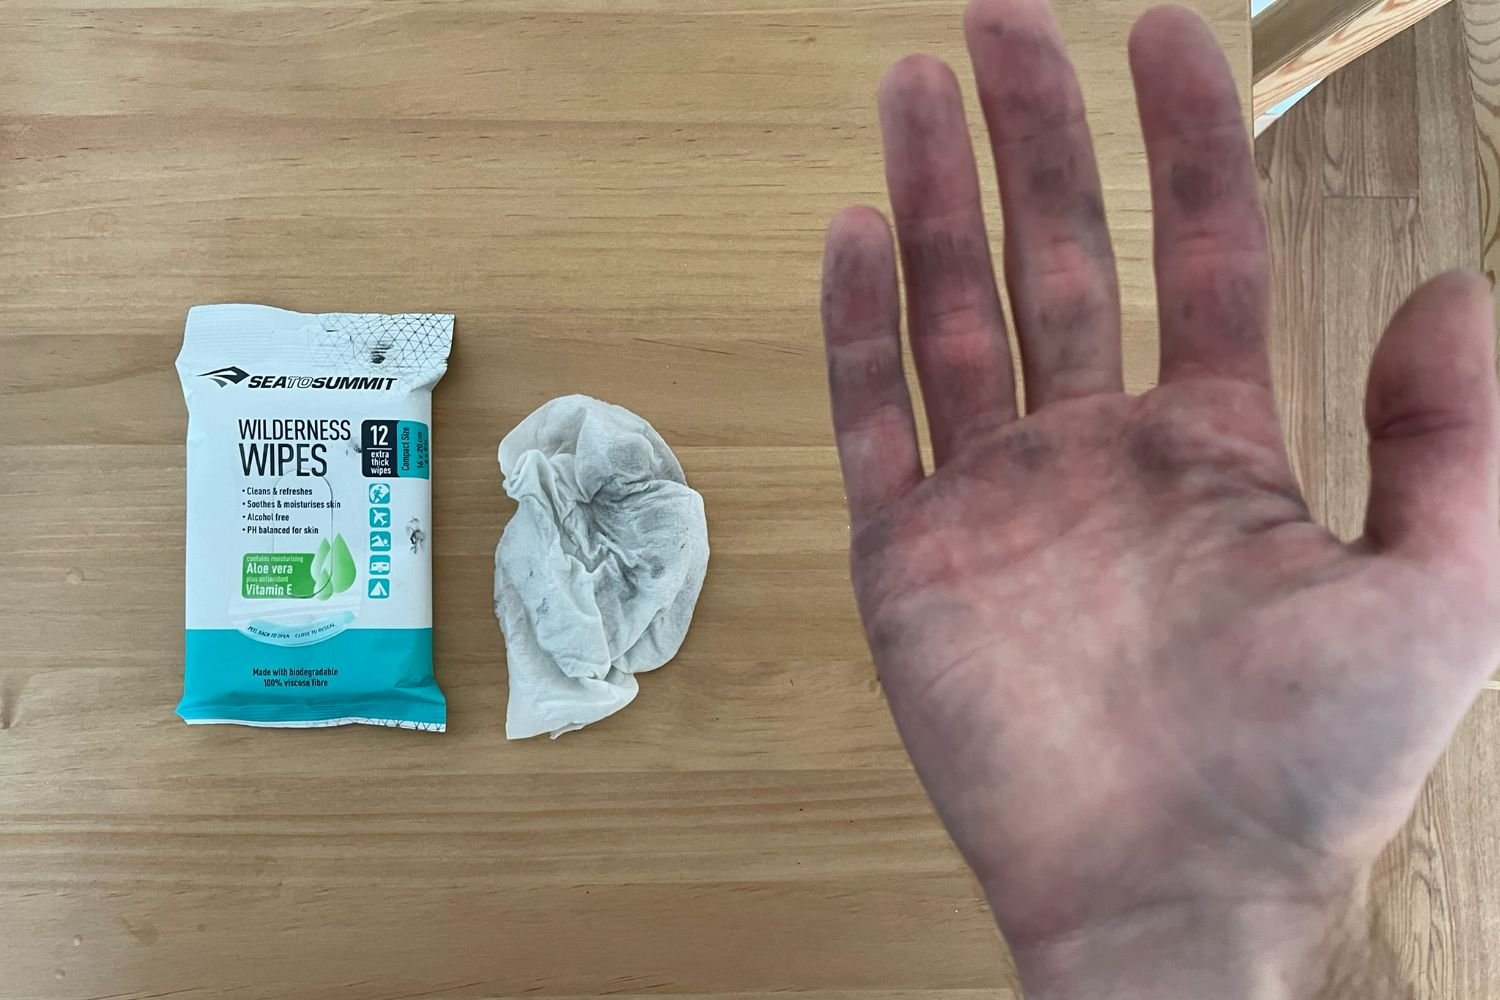  Biodegradable wipes aren’t as versatile or effective as liquid soaps. But they are extremely convenient, and often all you need for a quick freshening up. 